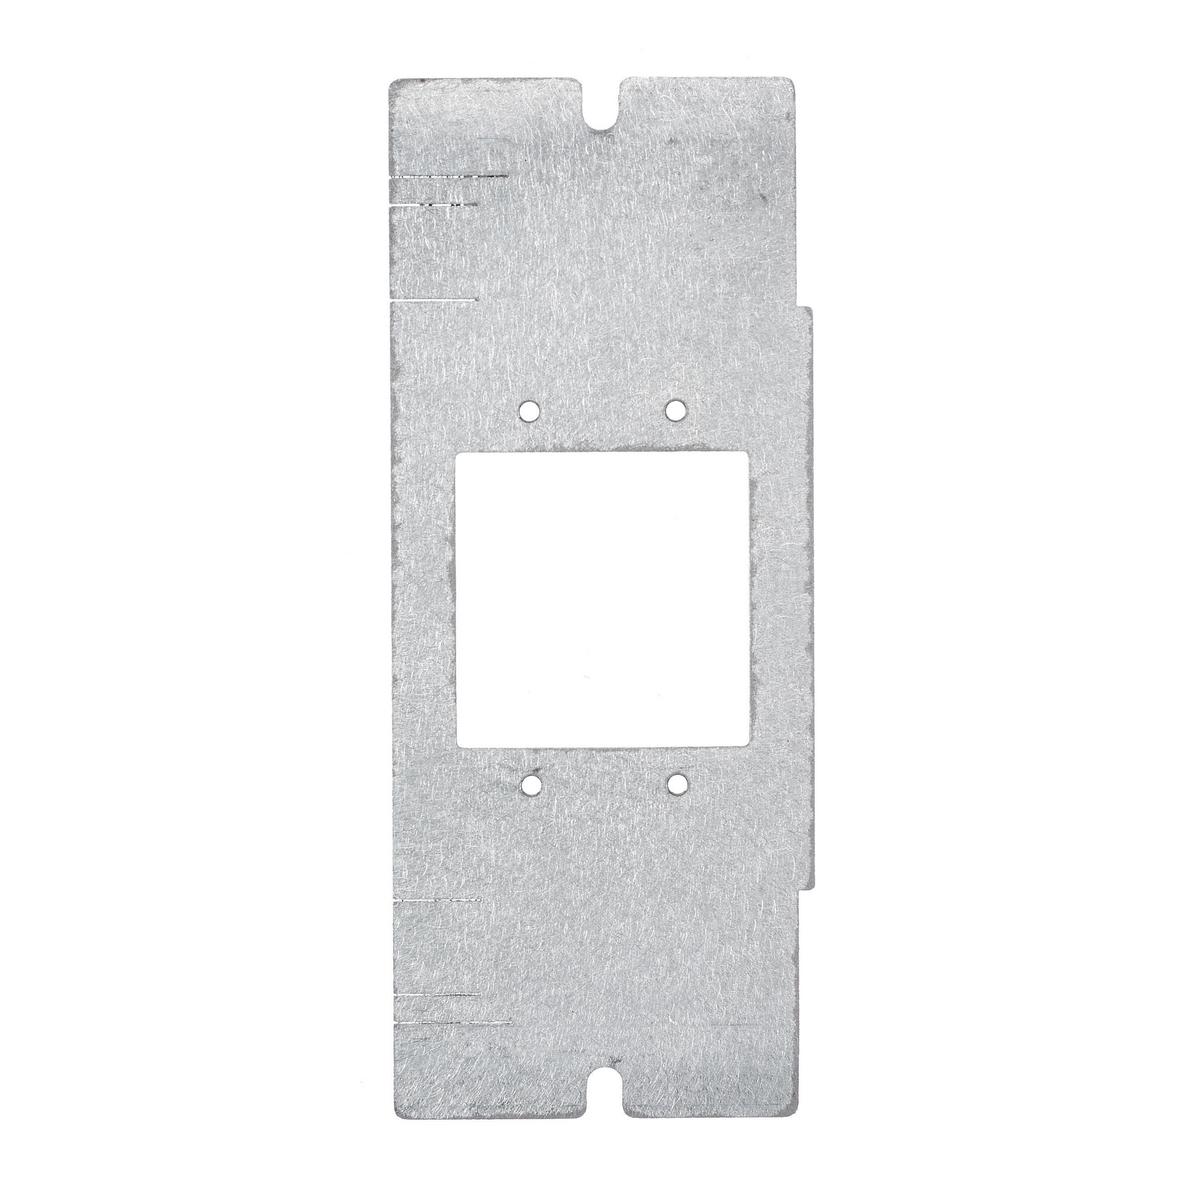 Hubbell FBMPMAAP Concrete, Access, Wood Floorboxes, Recessed, 2, 4, & 6-Gang Series, Mounting Plate, 1-Gang, Opening Accommodates Extron® MAAP Modules or FSR IPS Series  ; Plate for Use in SystemOne 2, 4 & 6-Gang Recessed Floorboxes ; 1-Gang- (2) Extron® MAAP Opening ; Ho